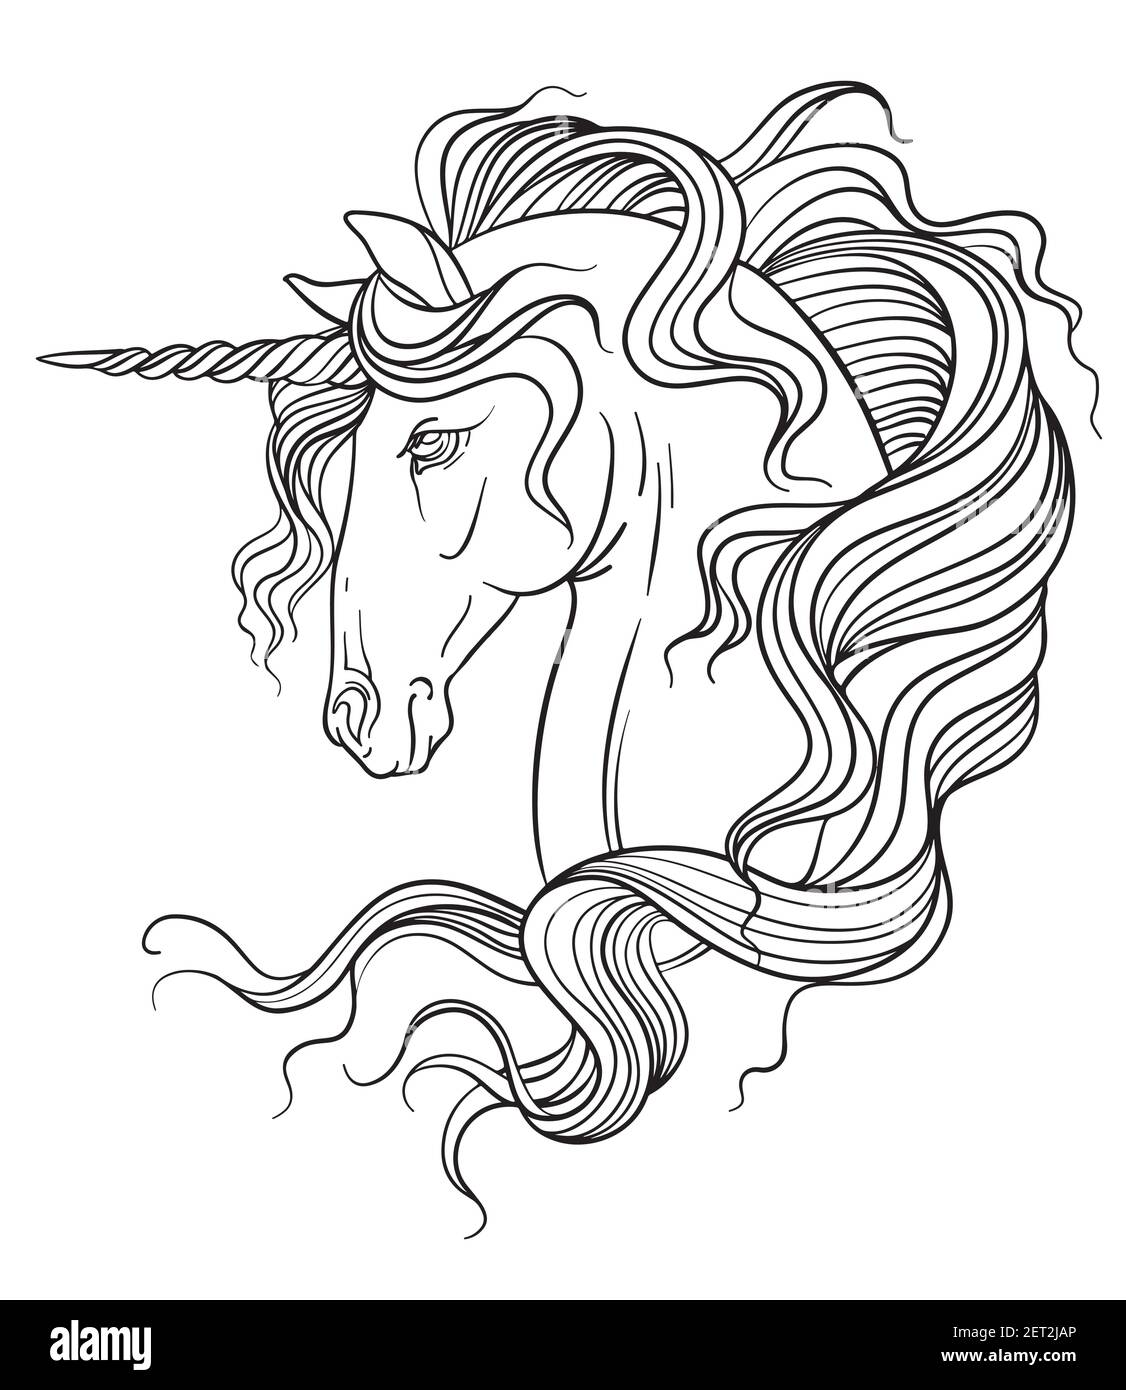 Elegant head of the unicorn with a long mane. Vector black and white isolated contour illustration for coloring book pages, design, prints, posters, p Stock Vector